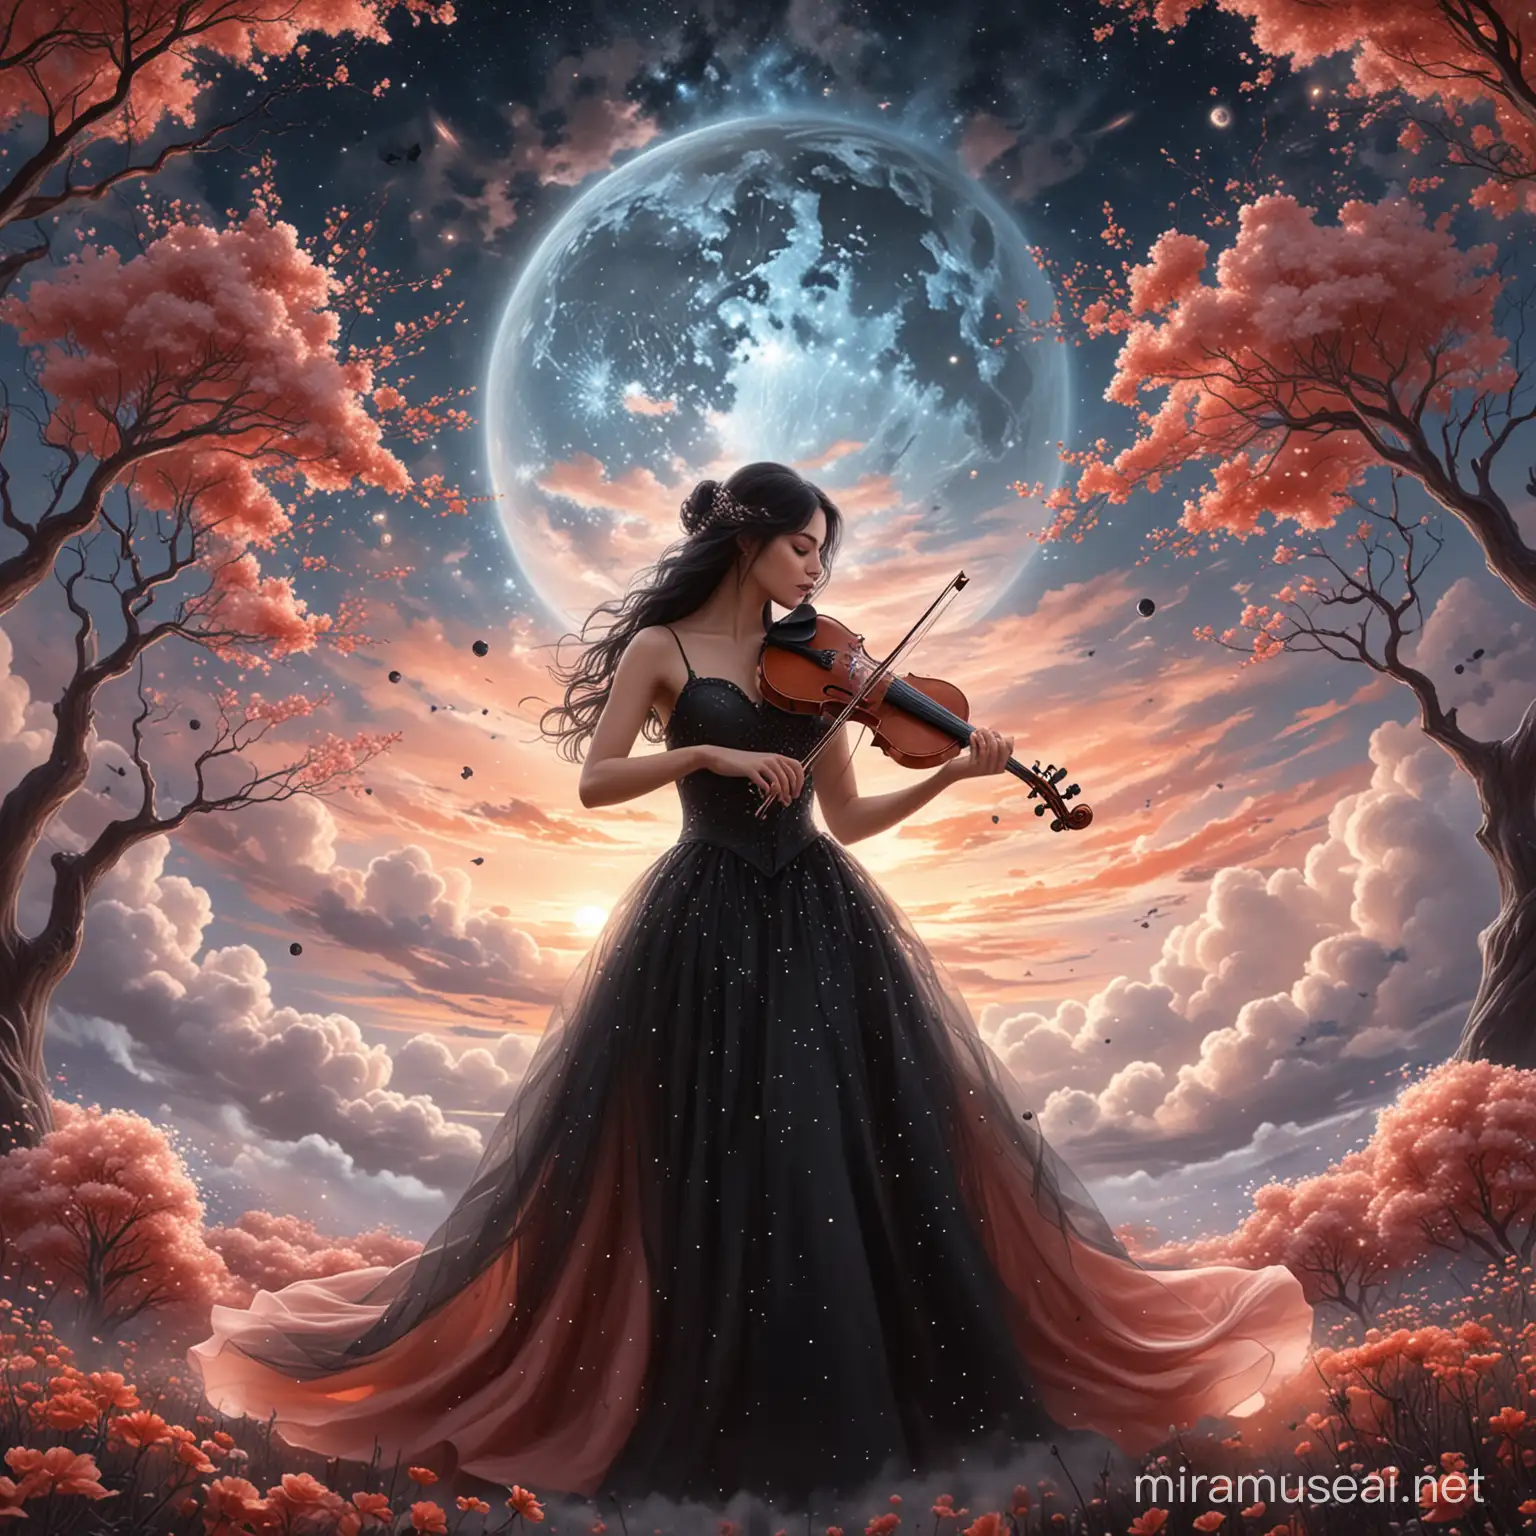 A beautiful woman, playing violon,  in the cloud sky, in front of a big transparent balls with branches inside. Long wavy black hair. Elegant long salmon and black wedding dress, haute couture. Background nebula salmon sky. Background constellation map. Background flowers. 8k, fantasy, illustration, digital art, illustration art, fantasy art, fantasy style